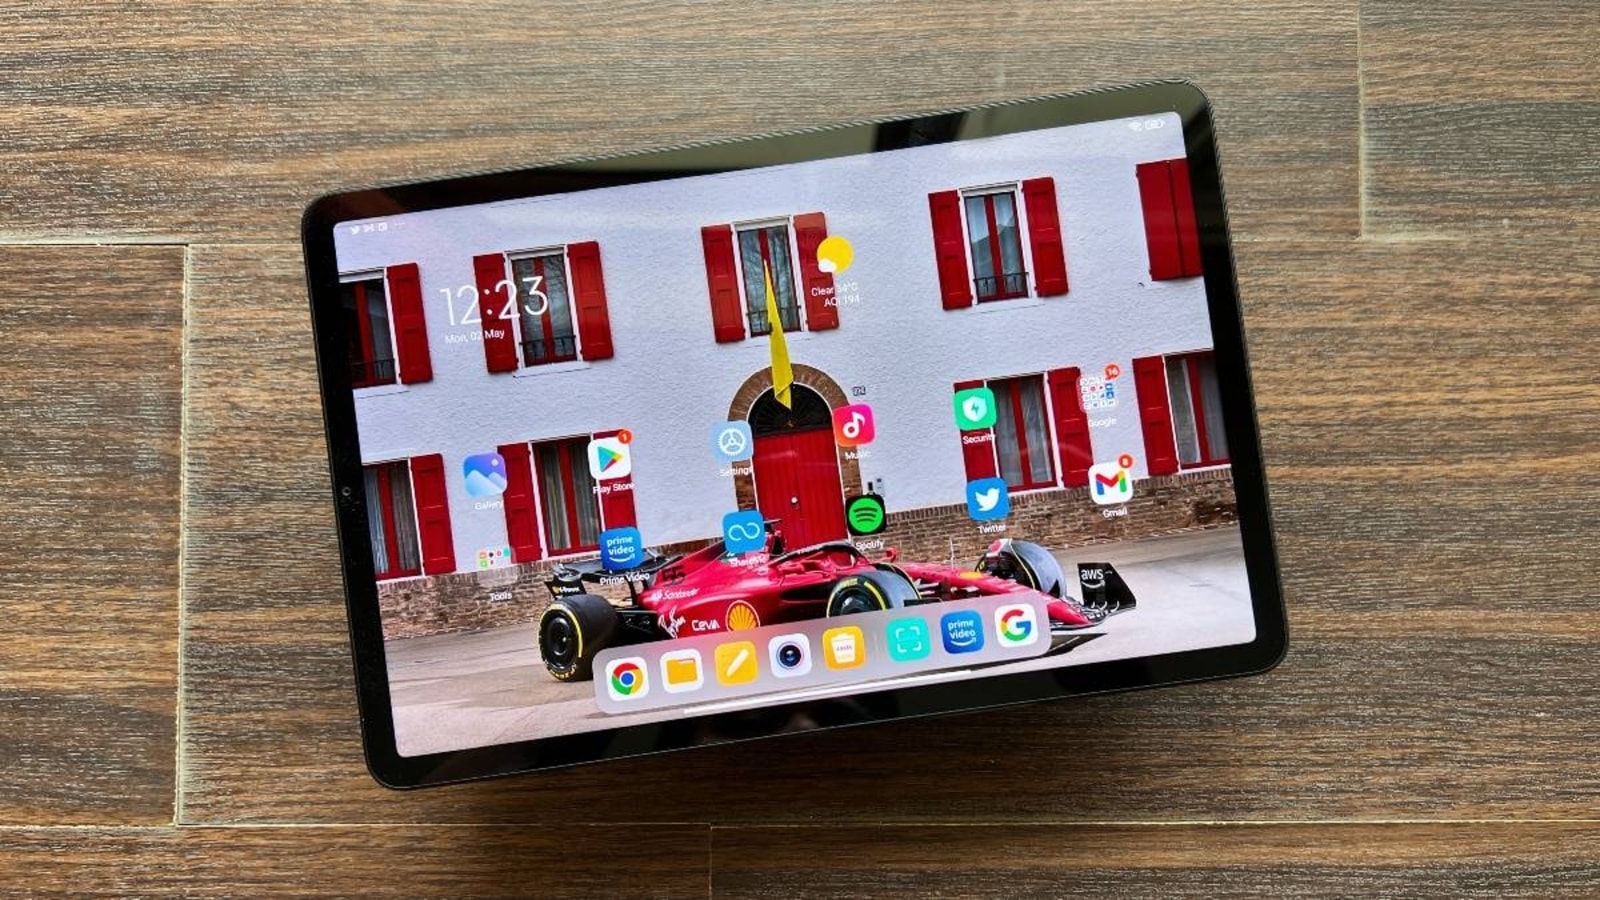 Xiaomi Mi Pad review: A plastic iPad Mini clone with oodles of Android  power (hands-on) - CNET